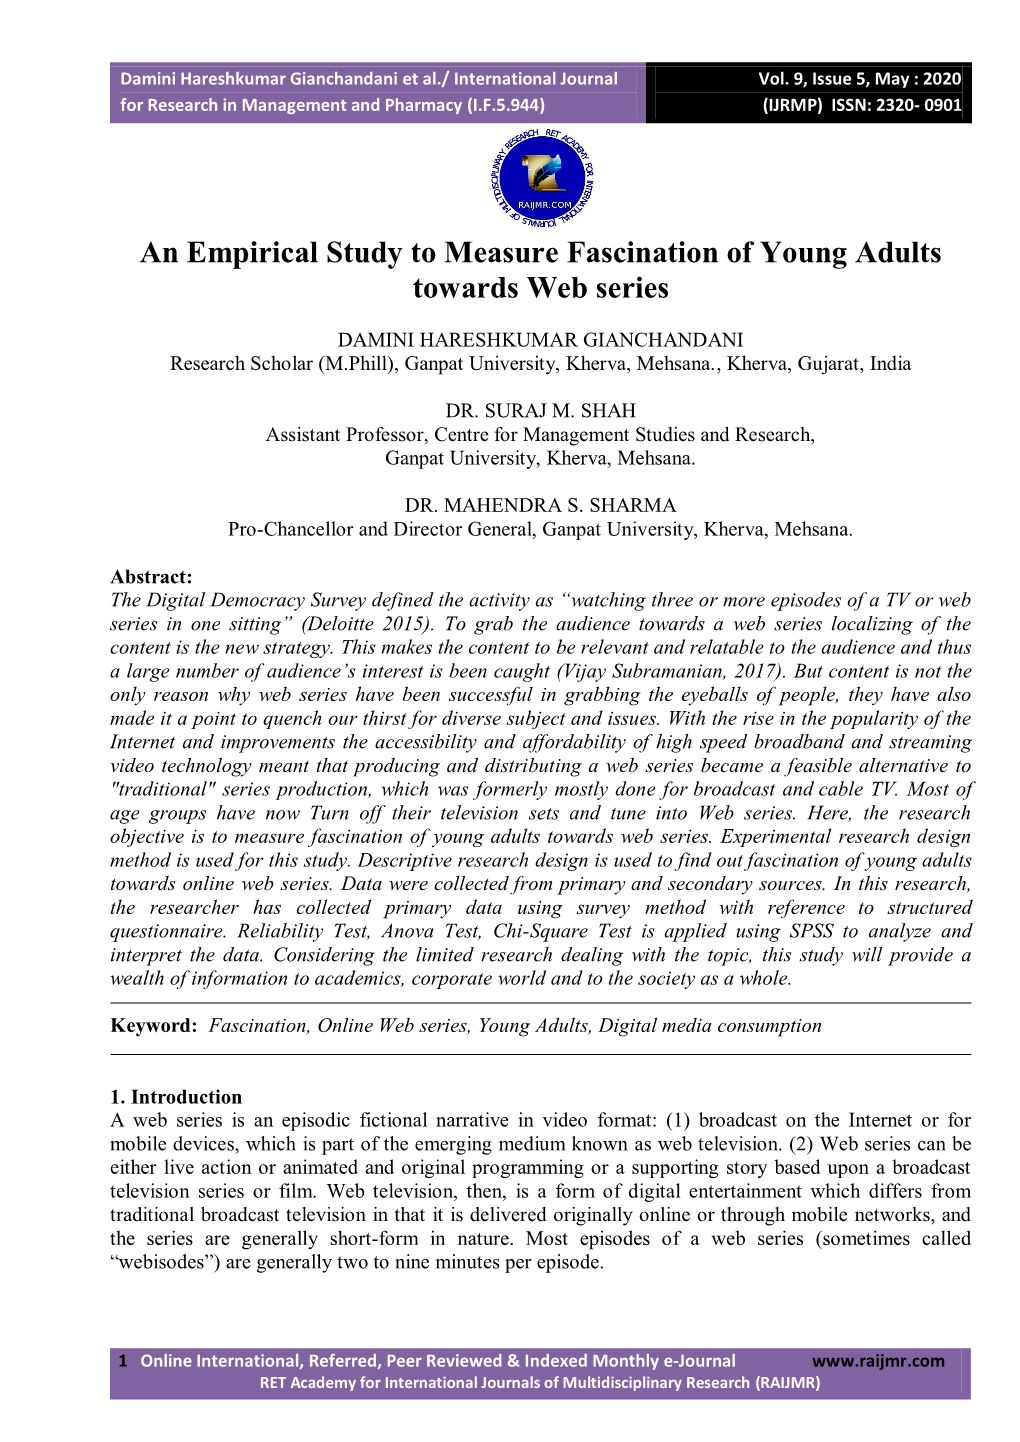 An Empirical Study to Measure Fascination of Young Adults Towards Web Series